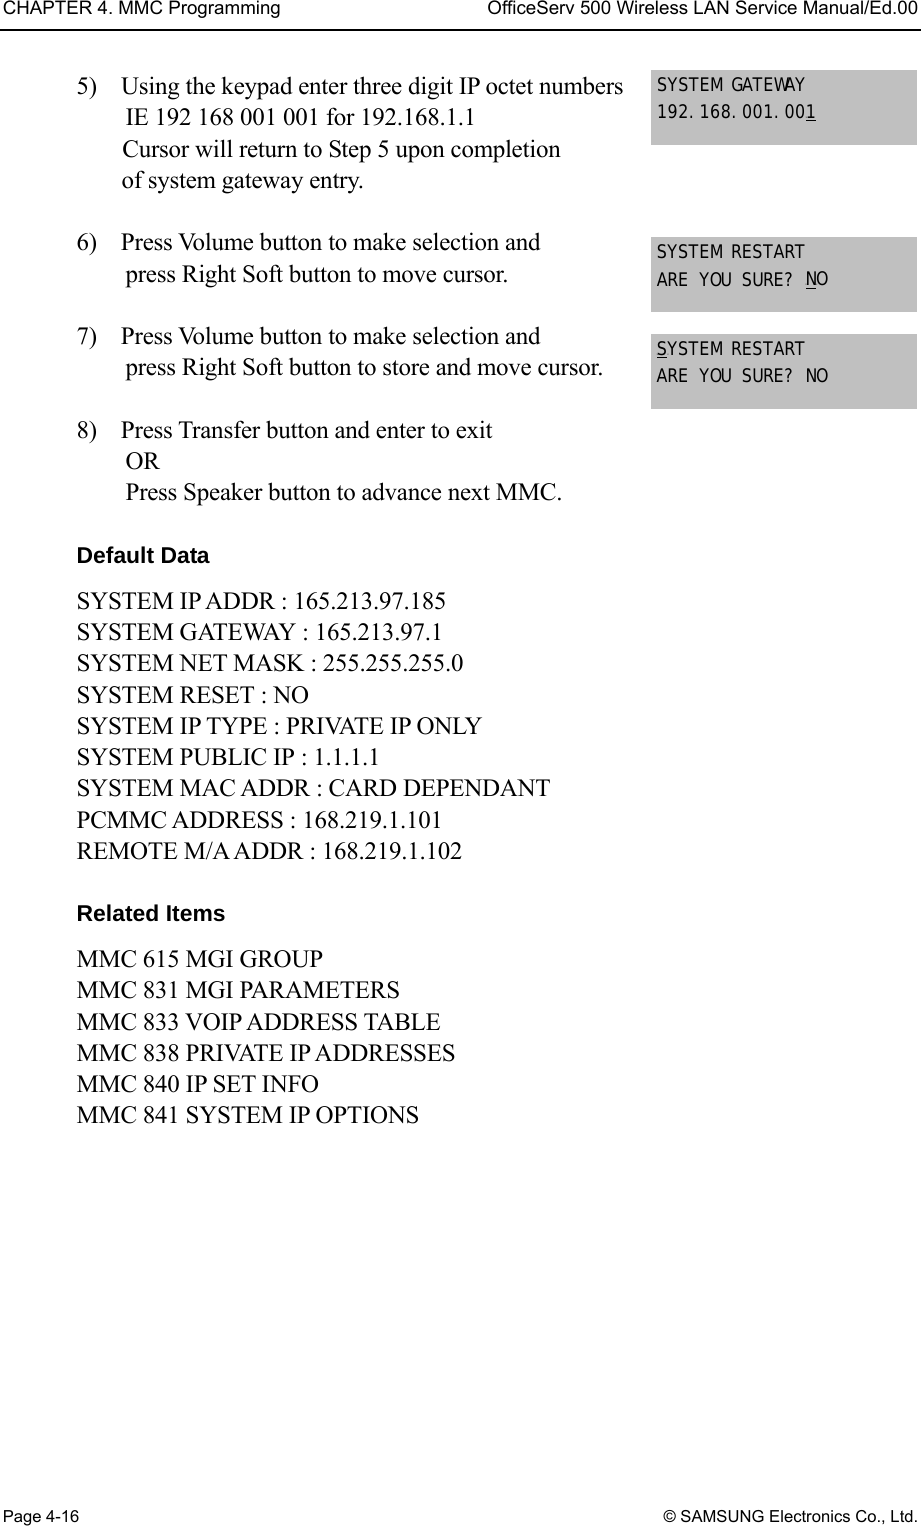 CHAPTER 4. MMC Programming  OfficeServ 500 Wireless LAN Service Manual/Ed.00 Page 4-16 © SAMSUNG Electronics Co., Ltd. 5)    Using the keypad enter three digit IP octet numbers   IE 192 168 001 001 for 192.168.1.1 Cursor will return to Step 5 upon completion   of system gateway entry.   6)    Press Volume button to make selection and   press Right Soft button to move cursor.   7)    Press Volume button to make selection and   press Right Soft button to store and move cursor.   8)    Press Transfer button and enter to exit   OR Press Speaker button to advance next MMC.  Default Data SYSTEM IP ADDR : 165.213.97.185 SYSTEM GATEWAY : 165.213.97.1 SYSTEM NET MASK : 255.255.255.0 SYSTEM RESET : NO SYSTEM IP TYPE : PRIVATE IP ONLY SYSTEM PUBLIC IP : 1.1.1.1 SYSTEM MAC ADDR : CARD DEPENDANT PCMMC ADDRESS : 168.219.1.101 REMOTE M/A ADDR : 168.219.1.102  Related Items MMC 615 MGI GROUP MMC 831 MGI PARAMETERS MMC 833 VOIP ADDRESS TABLE MMC 838 PRIVATE IP ADDRESSES MMC 840 IP SET INFO MMC 841 SYSTEM IP OPTIONS SYSTEM GATEWAY 192.168.001.00U1 SYSTEM RESTART ARE YOU SURE? UNUO  USUYSTEM RESTART ARE YOU SURE? NO  